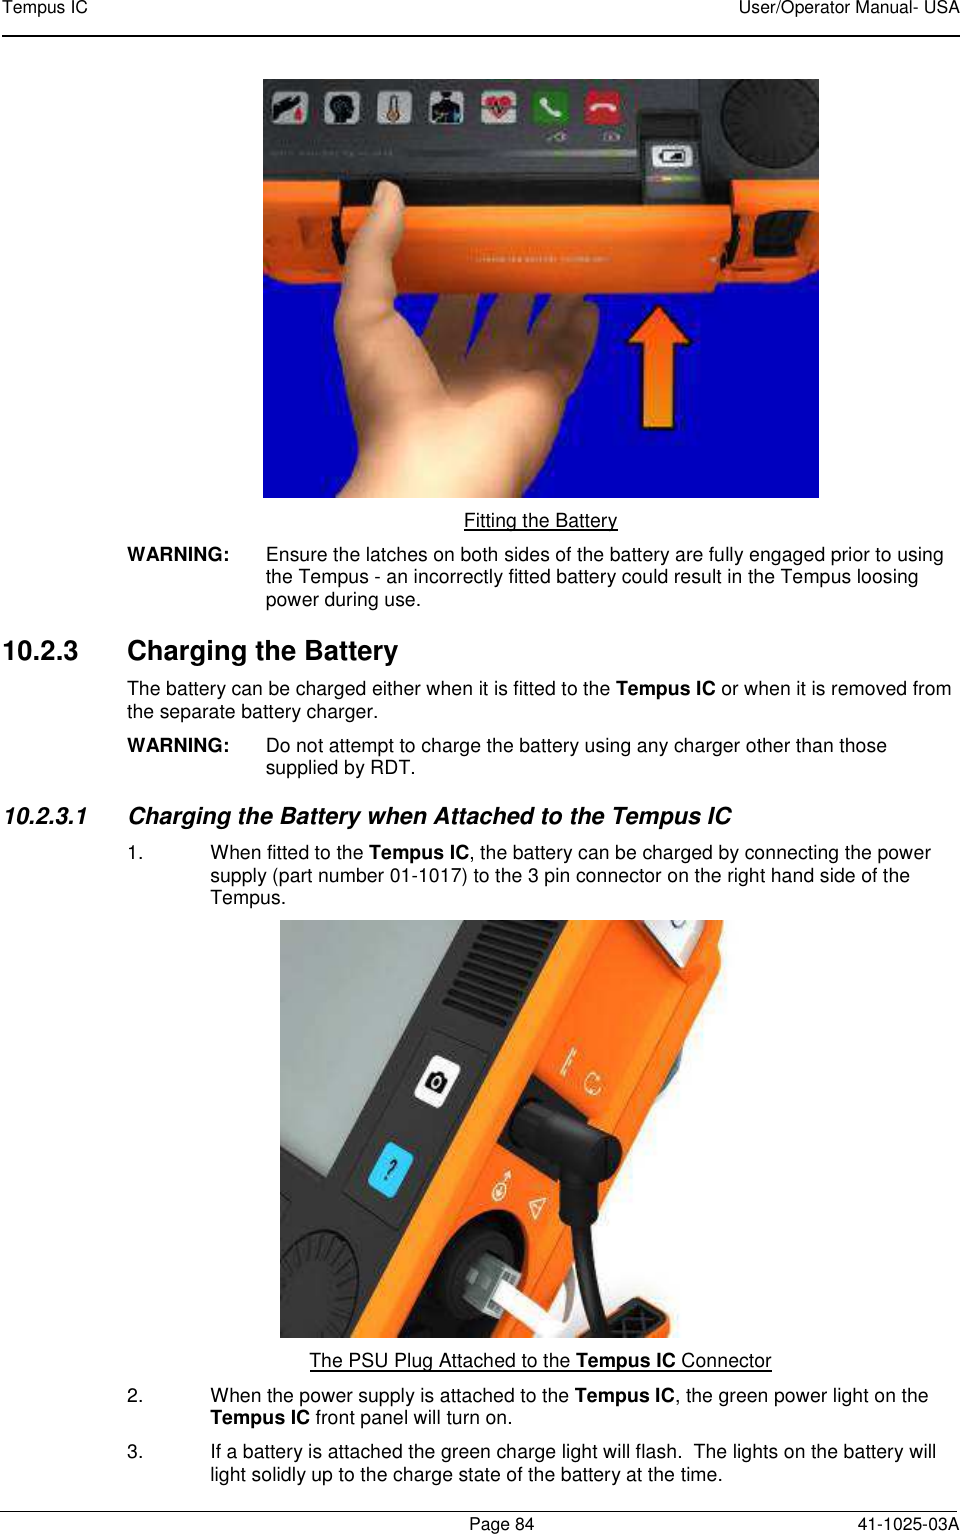 Tempus IC    User/Operator Manual- USA        Page 84   41-1025-03A  Fitting the Battery WARNING:  Ensure the latches on both sides of the battery are fully engaged prior to using the Tempus - an incorrectly fitted battery could result in the Tempus loosing power during use. 10.2.3  Charging the Battery The battery can be charged either when it is fitted to the Tempus IC or when it is removed from the separate battery charger. WARNING:  Do not attempt to charge the battery using any charger other than those supplied by RDT. 10.2.3.1  Charging the Battery when Attached to the Tempus IC 1.  When fitted to the Tempus IC, the battery can be charged by connecting the power supply (part number 01-1017) to the 3 pin connector on the right hand side of the Tempus.  The PSU Plug Attached to the Tempus IC Connector 2.  When the power supply is attached to the Tempus IC, the green power light on the Tempus IC front panel will turn on.  3.  If a battery is attached the green charge light will flash.  The lights on the battery will light solidly up to the charge state of the battery at the time. 